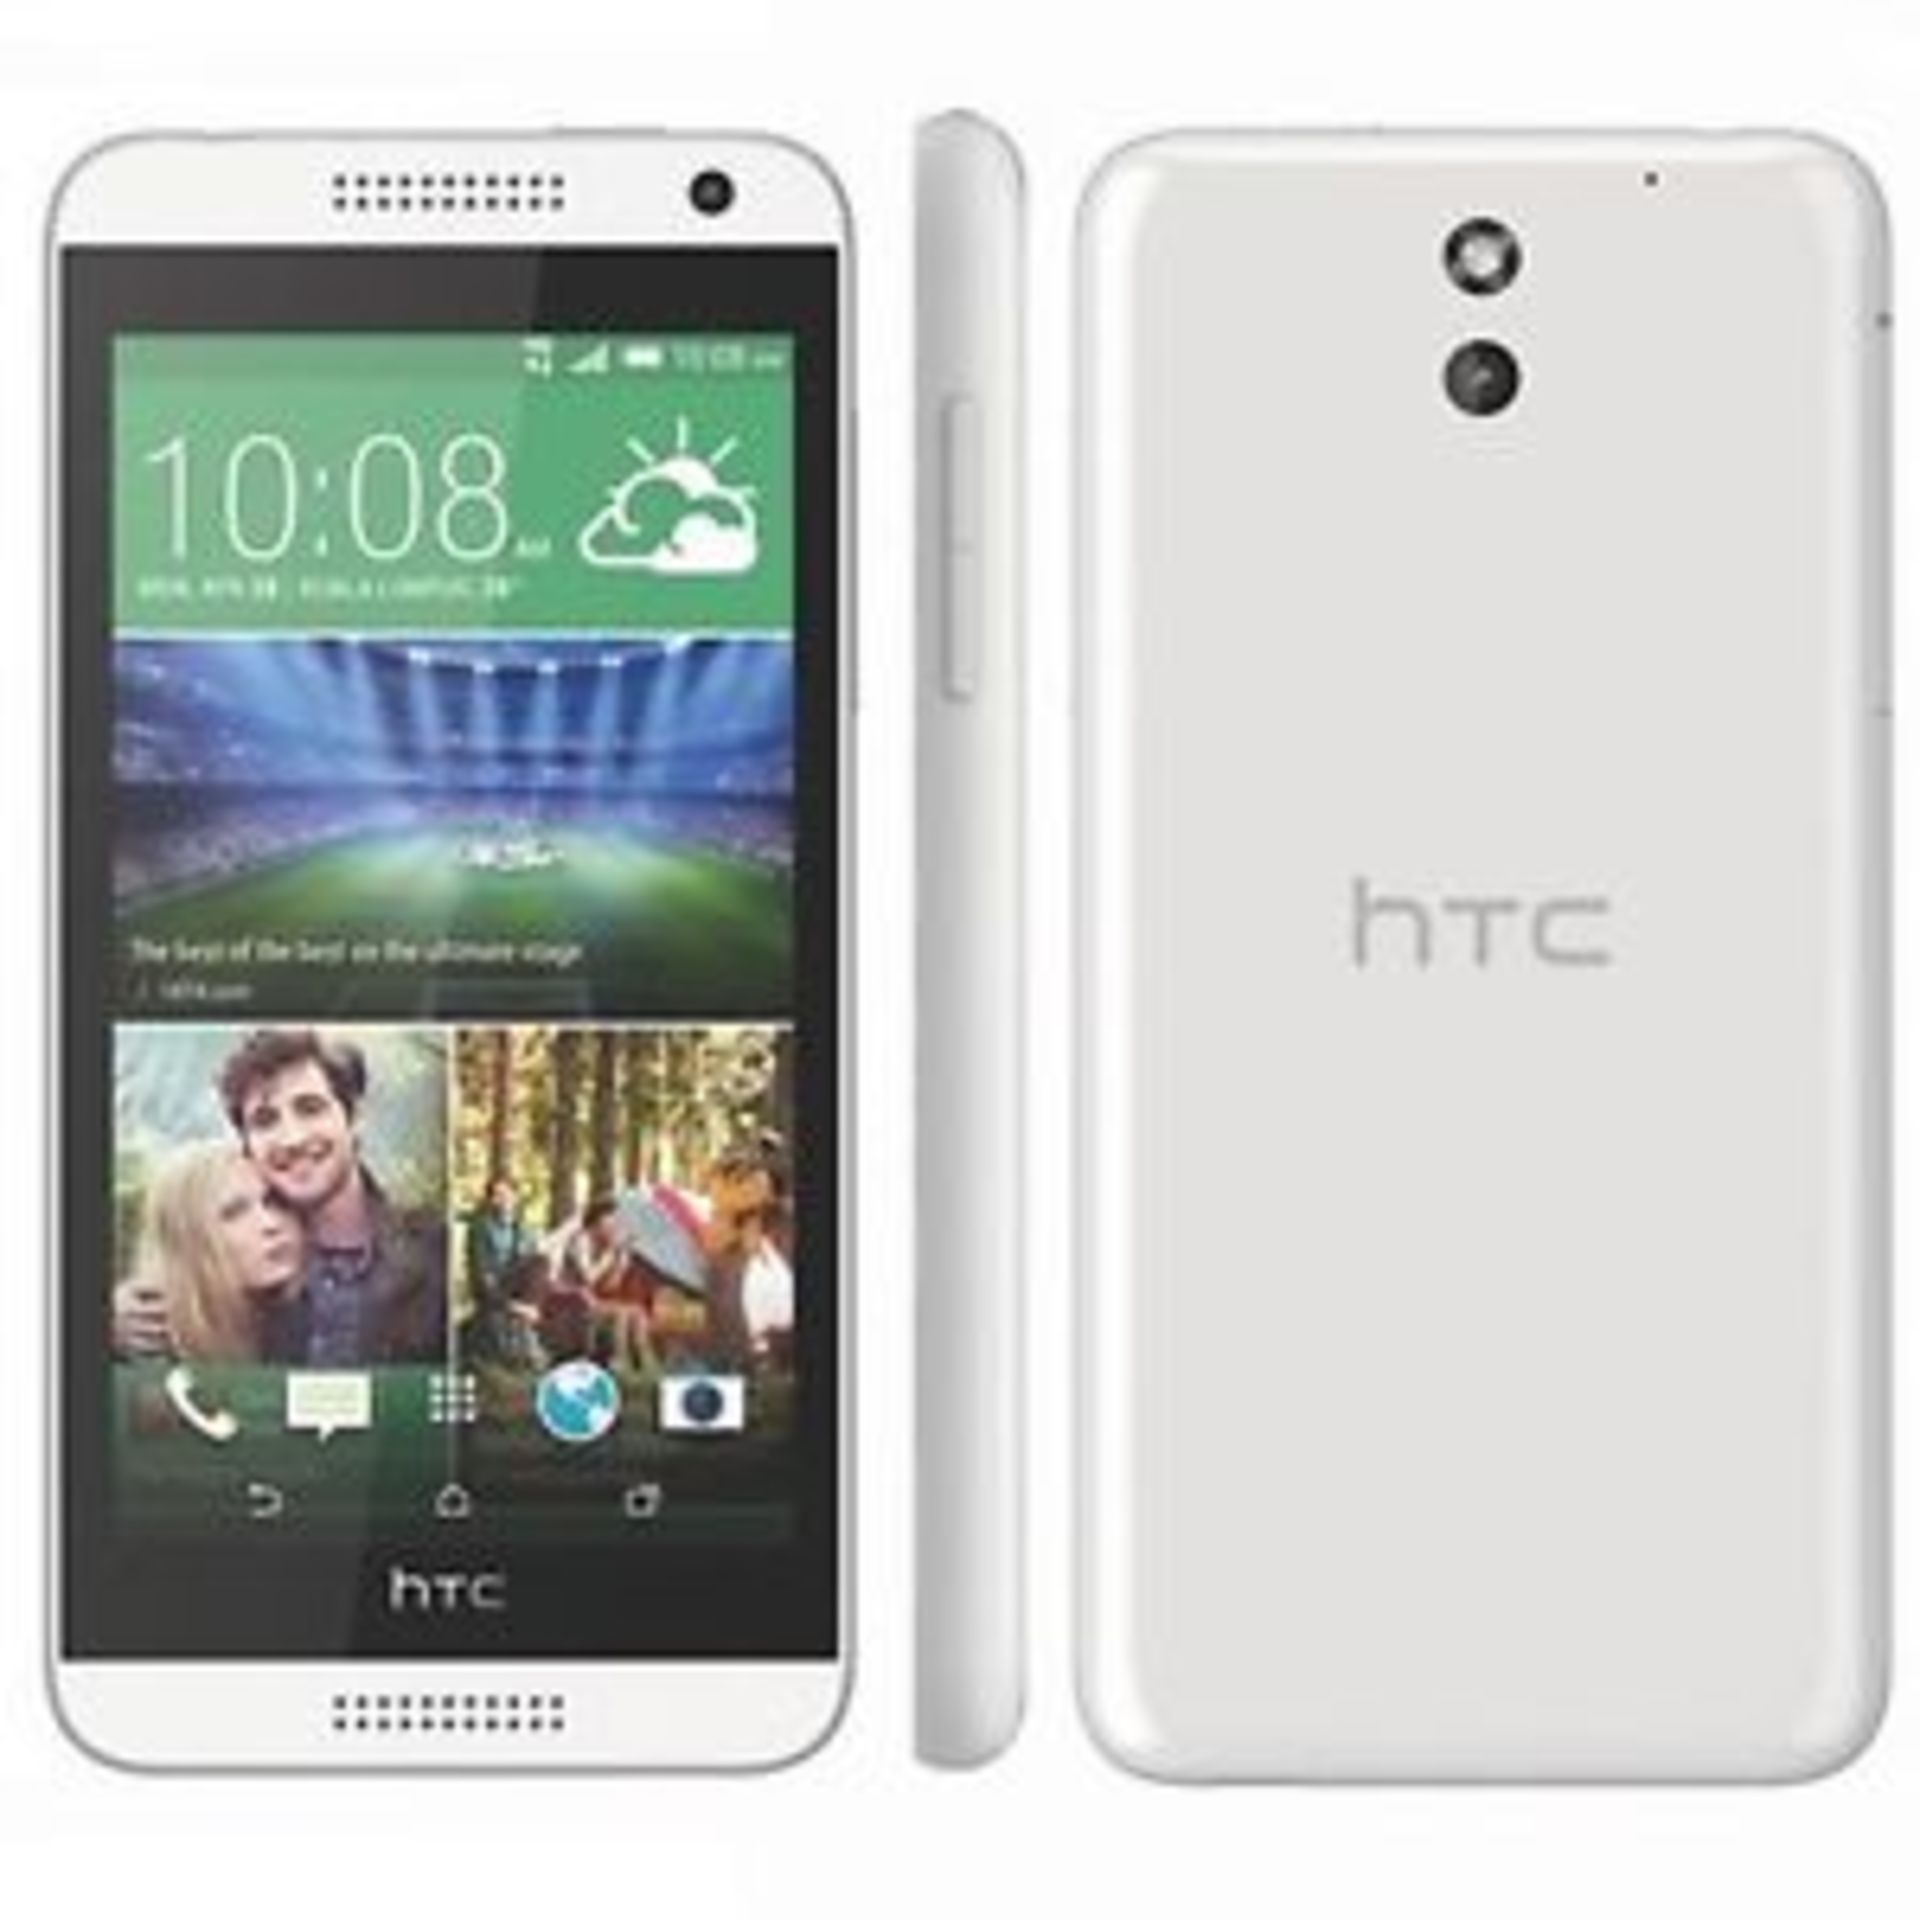 Grade A HTC Desire 610 Colours May Vary - Item Available After Approx 12 Working Days After